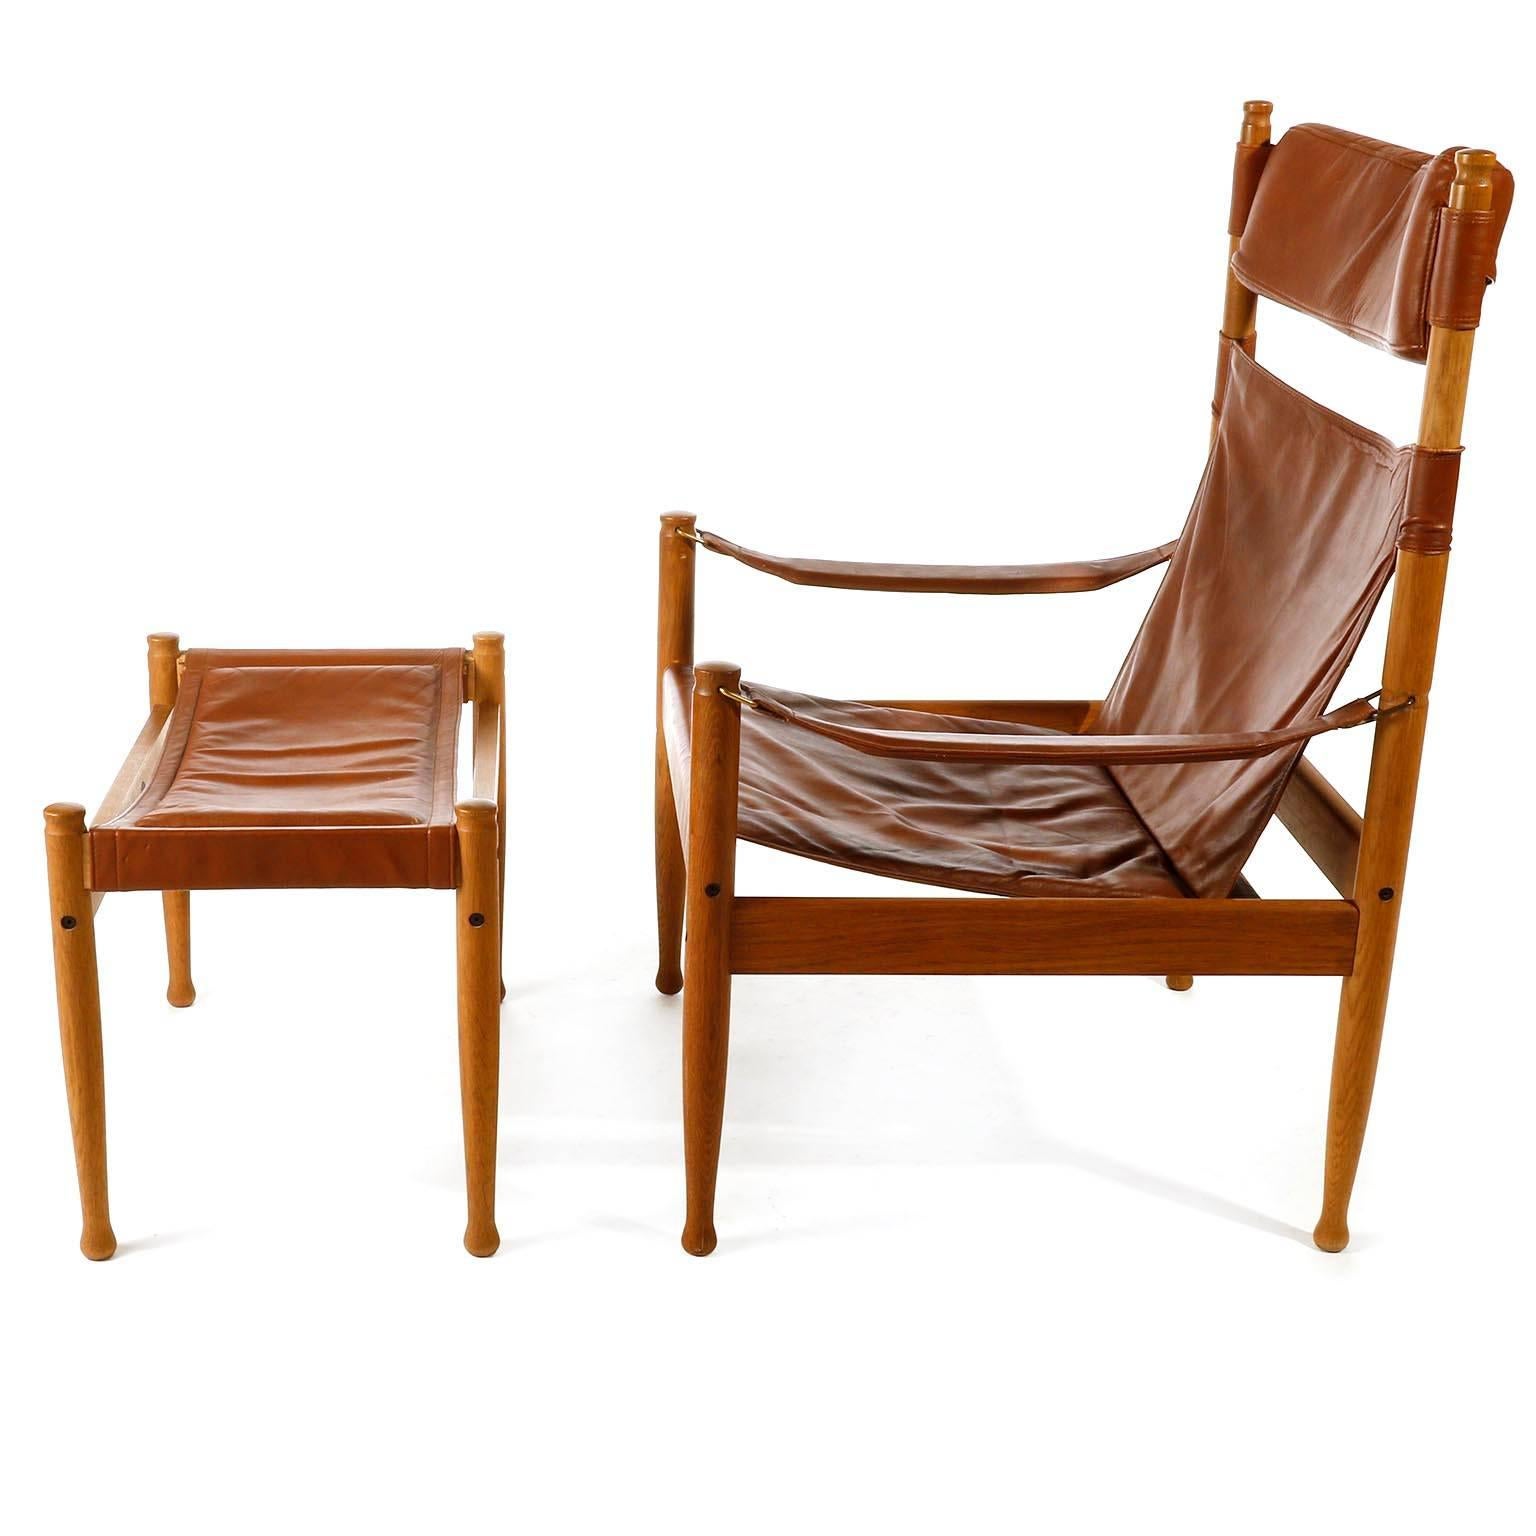 A fantastic highback safari lounge chair with ottoman in oak or elm and wonderful warm toned cognac leather designed by Erik Wørts for Niels Eilersen, Denmark, manufactured in midcentury, circa 1960 (late 1950s or early 1960s).
A very dynamic design